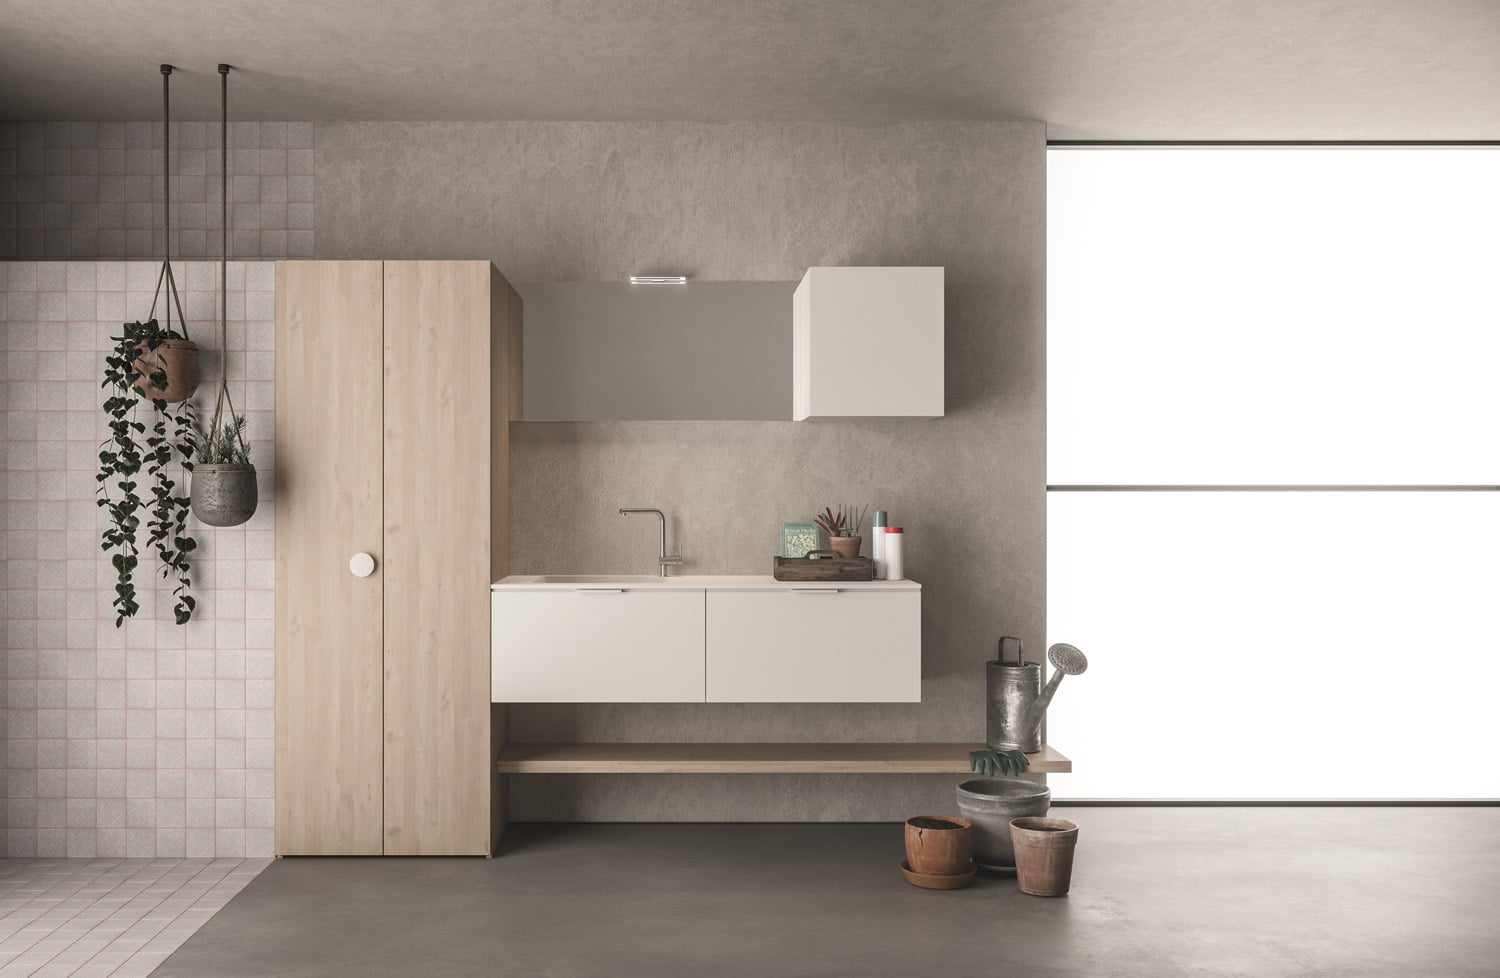 The tall unit hides washer and dryer, and is complemented by a matching shelf and storage cabinets. The minimalist handles of the floating cabinets are paired with the round handles available for the tall cabinets. 